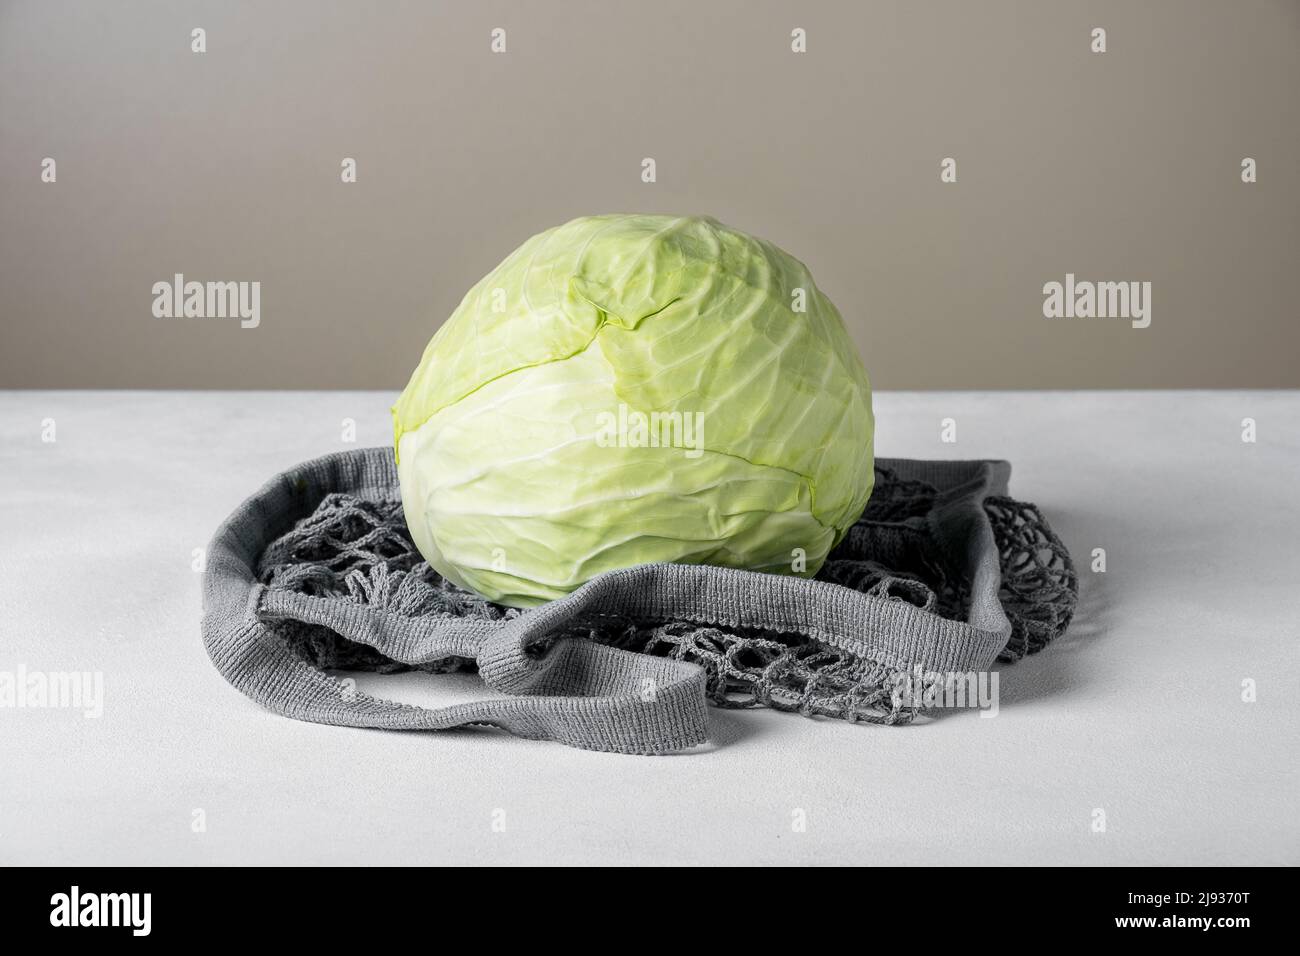 White cabbage lie on the surface in environmentally friendly bag Stock Photo